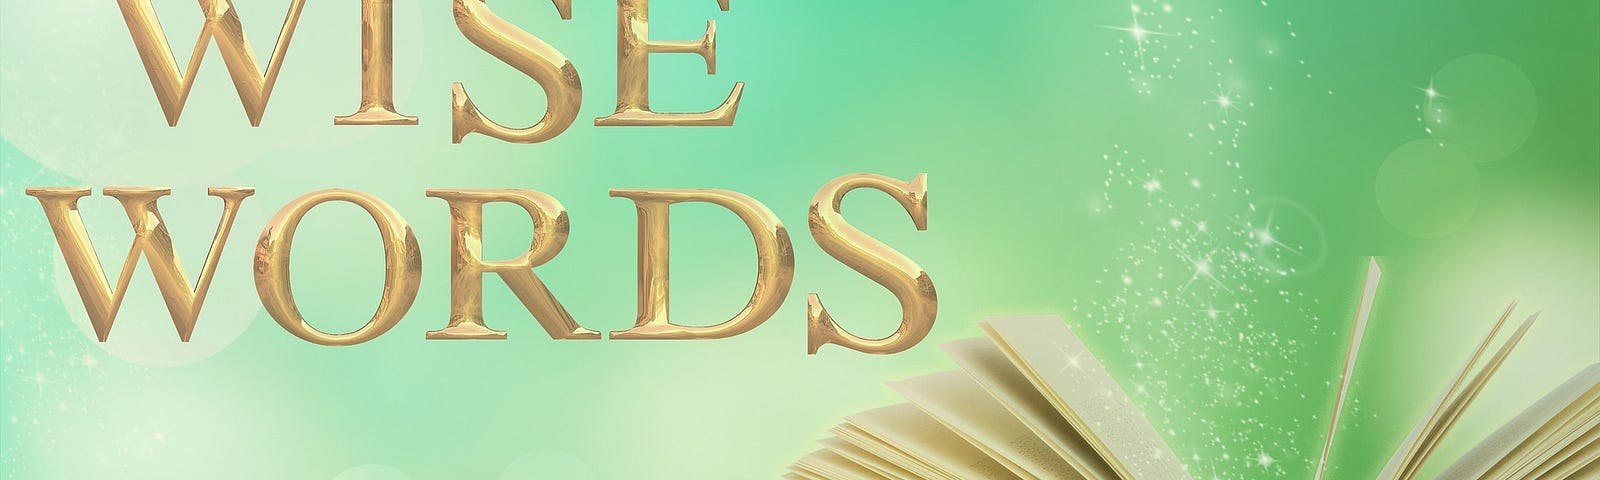 “Wise Words” in gold letters on teal background above open book